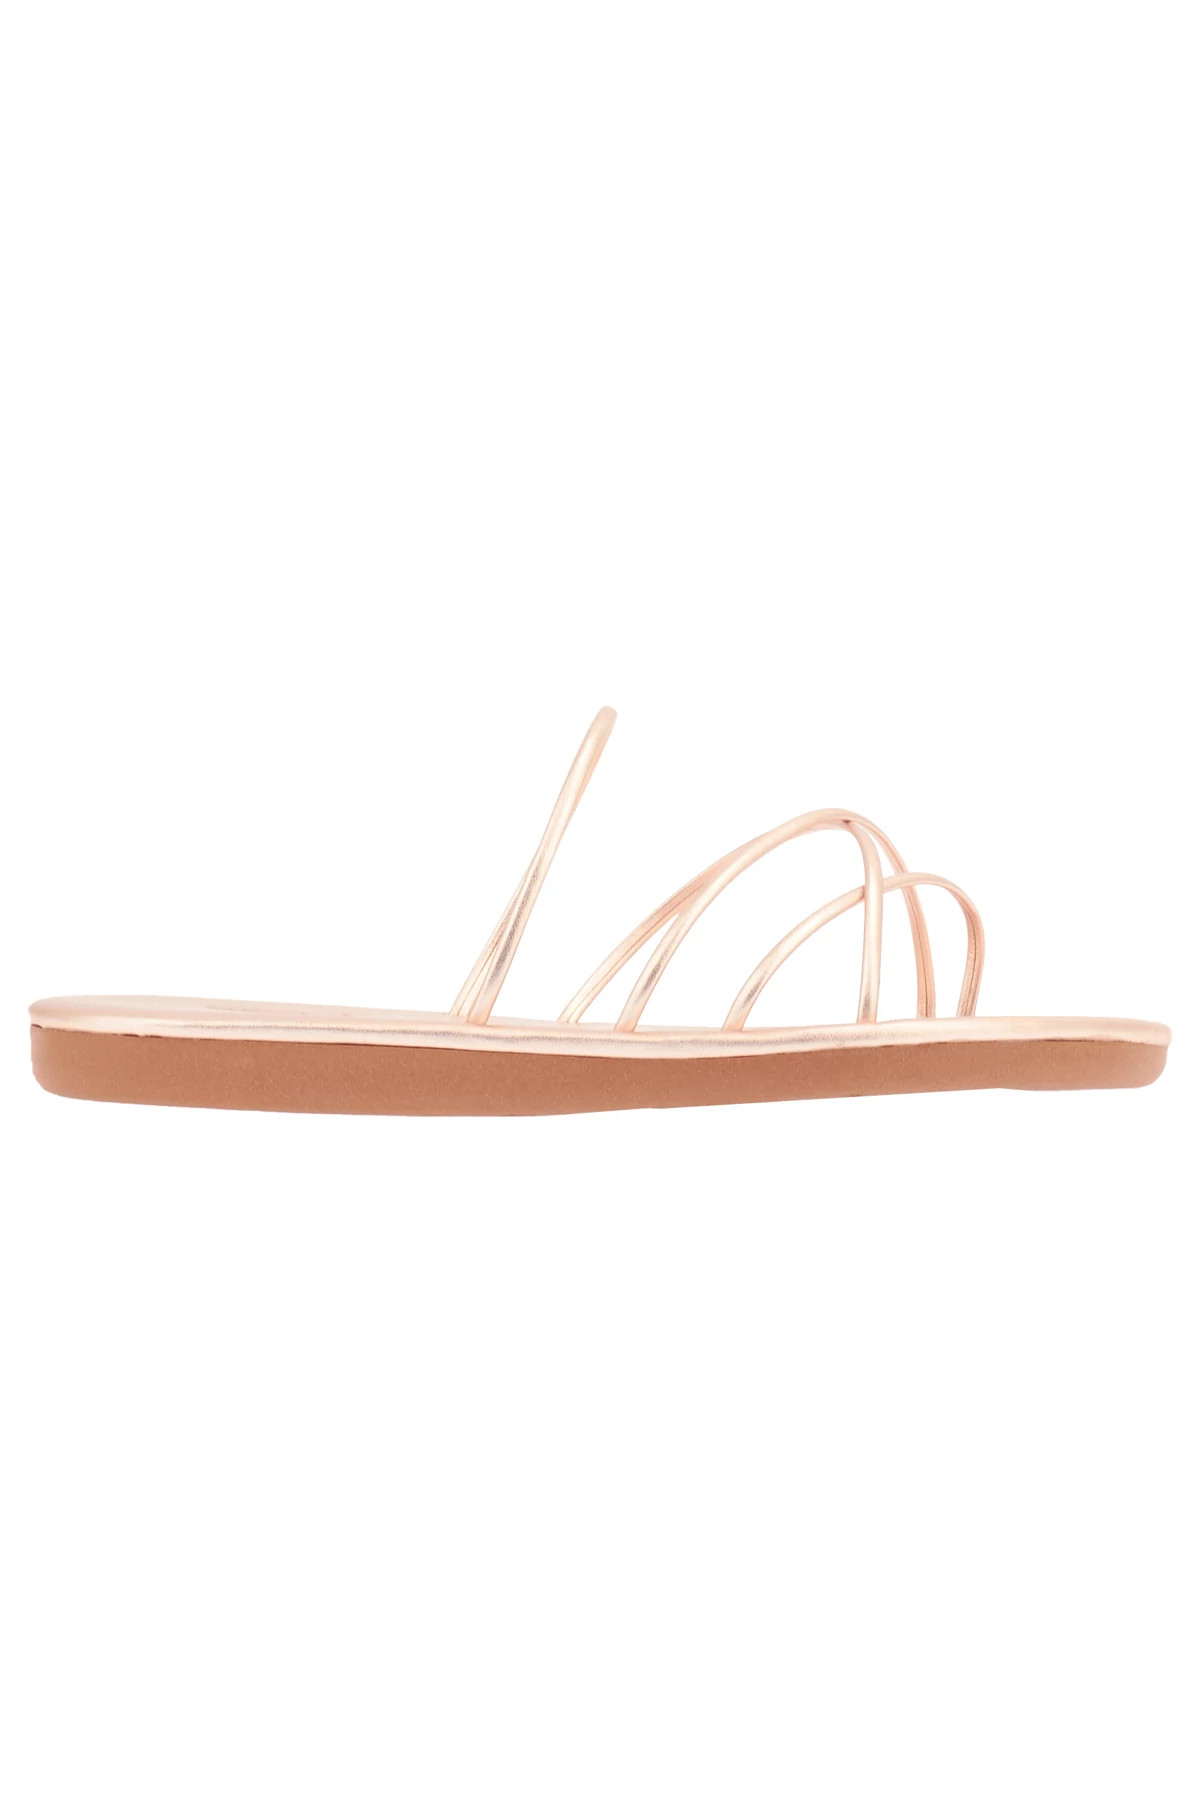 ROSE GOLD Pu Metallic Strappy Sandals image number 3